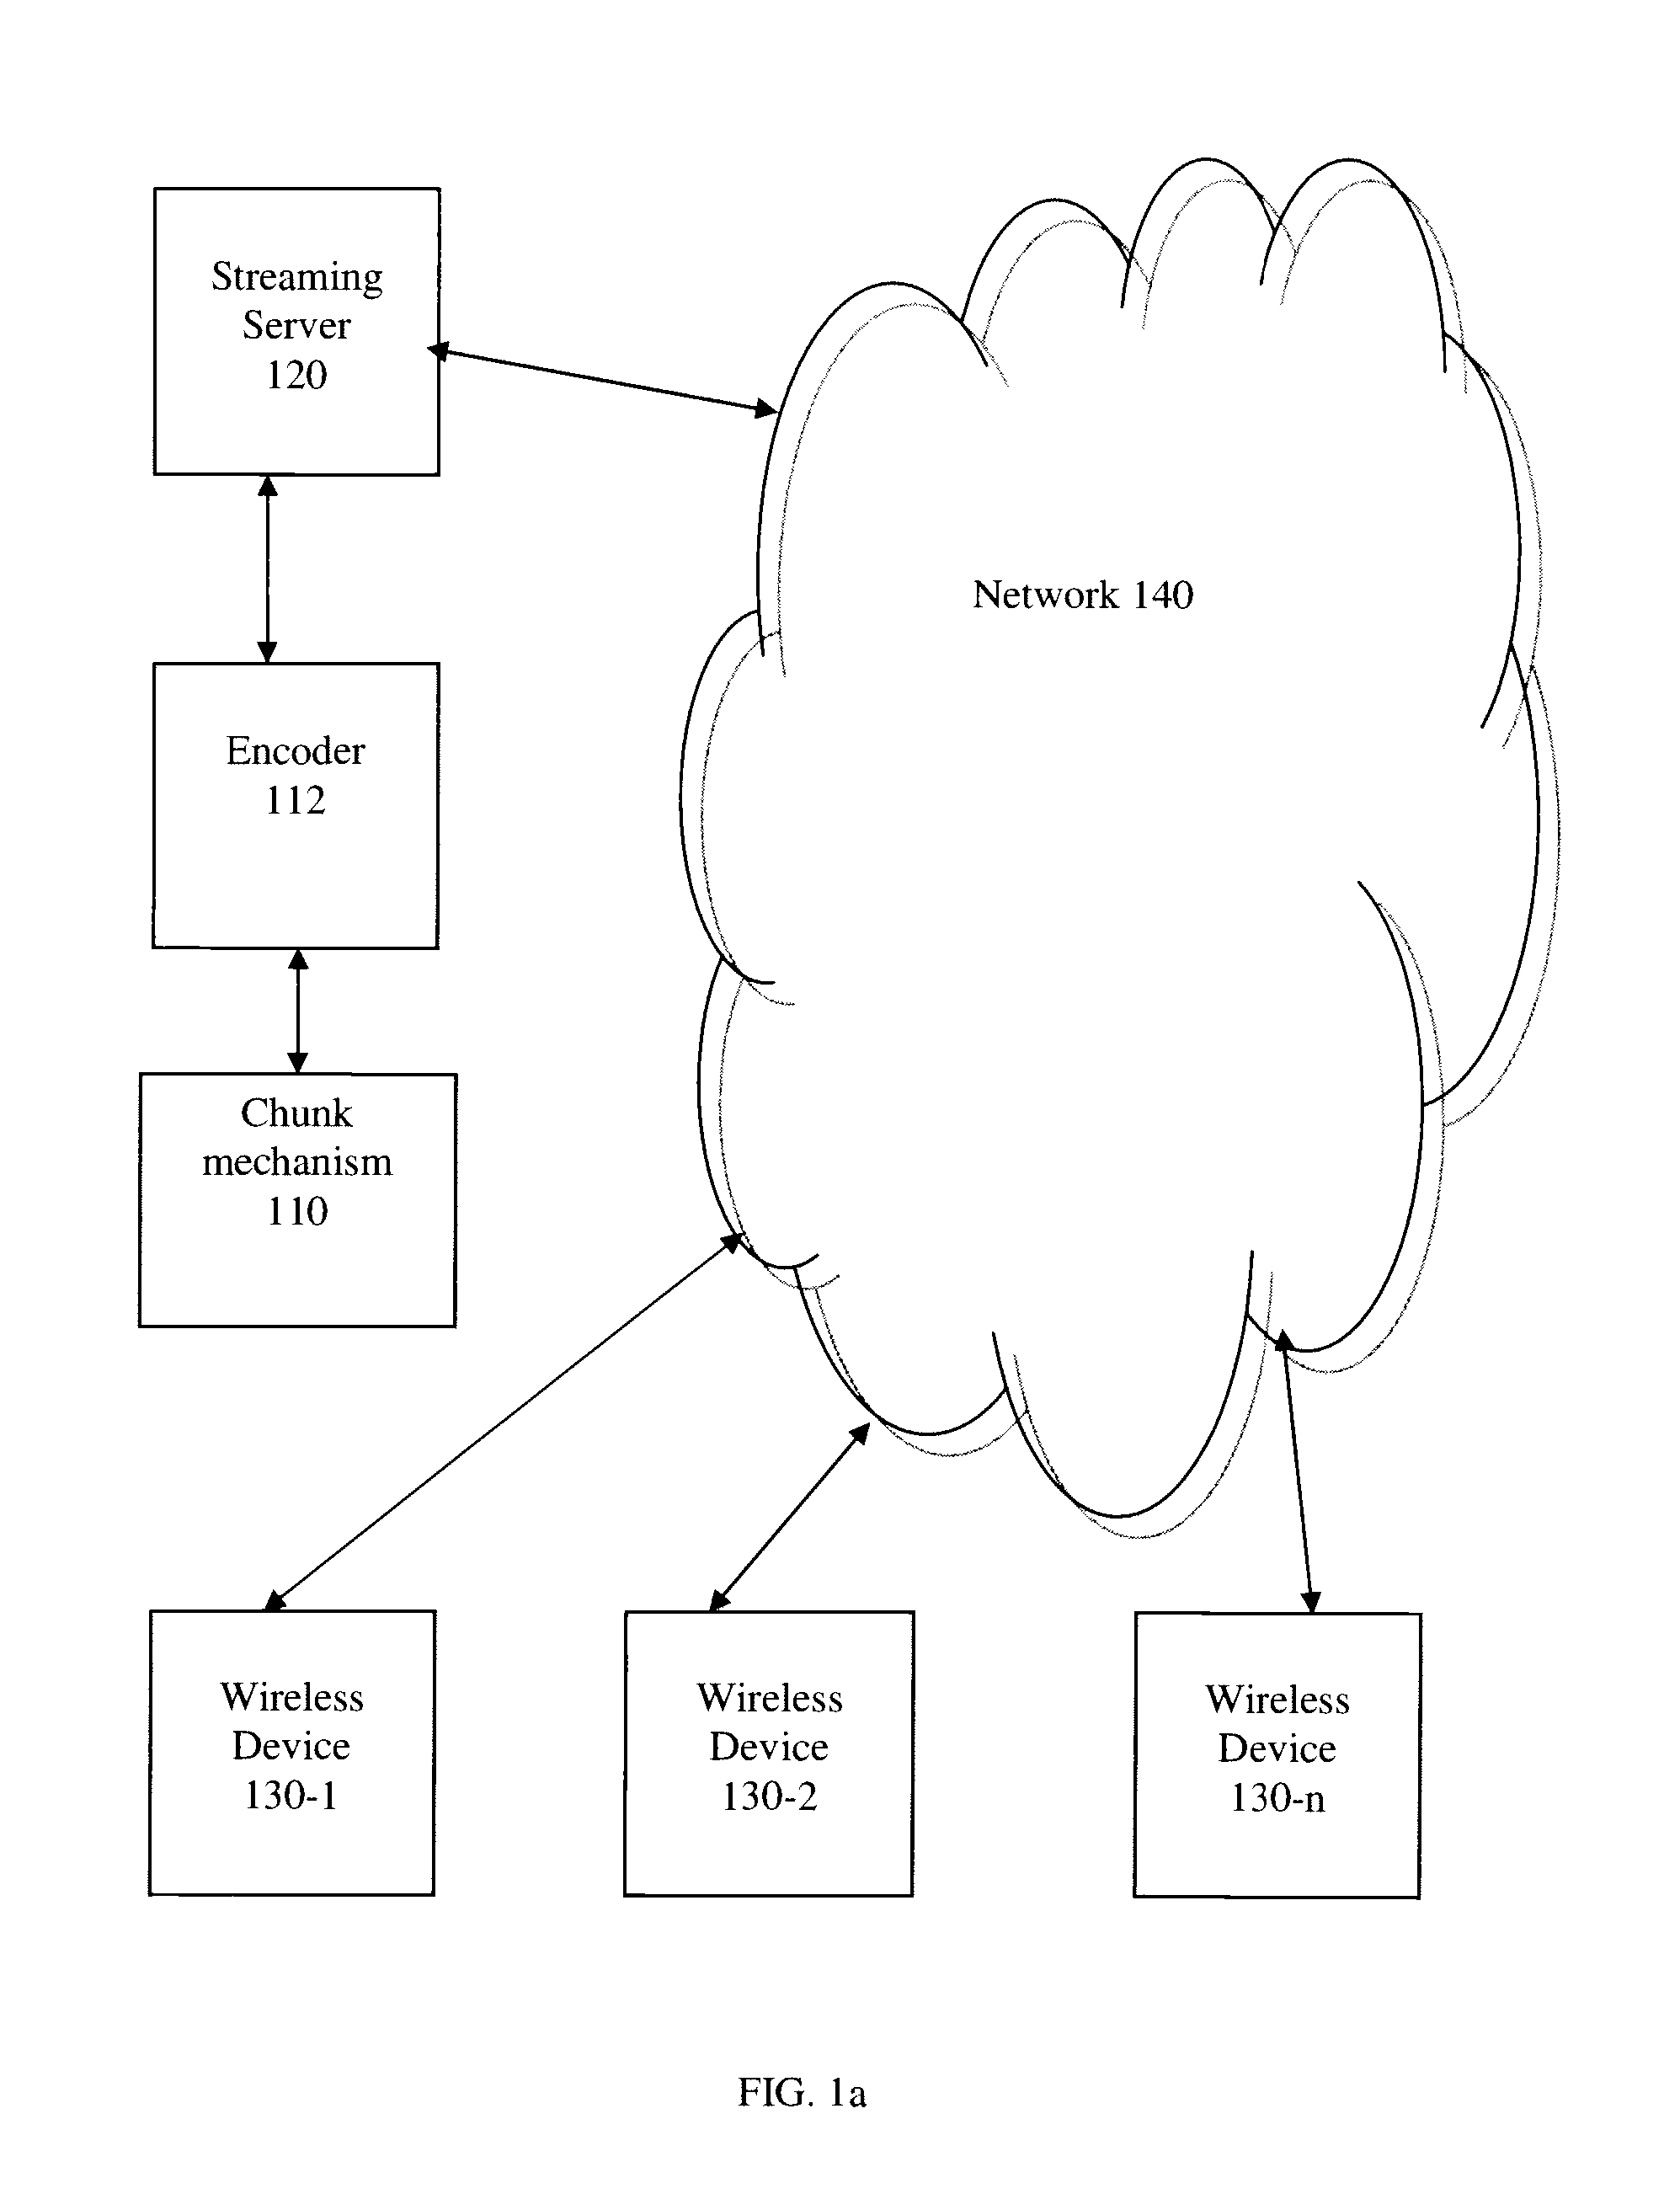 Method and apparatus for streaming media to a plurality of adaptive client devices